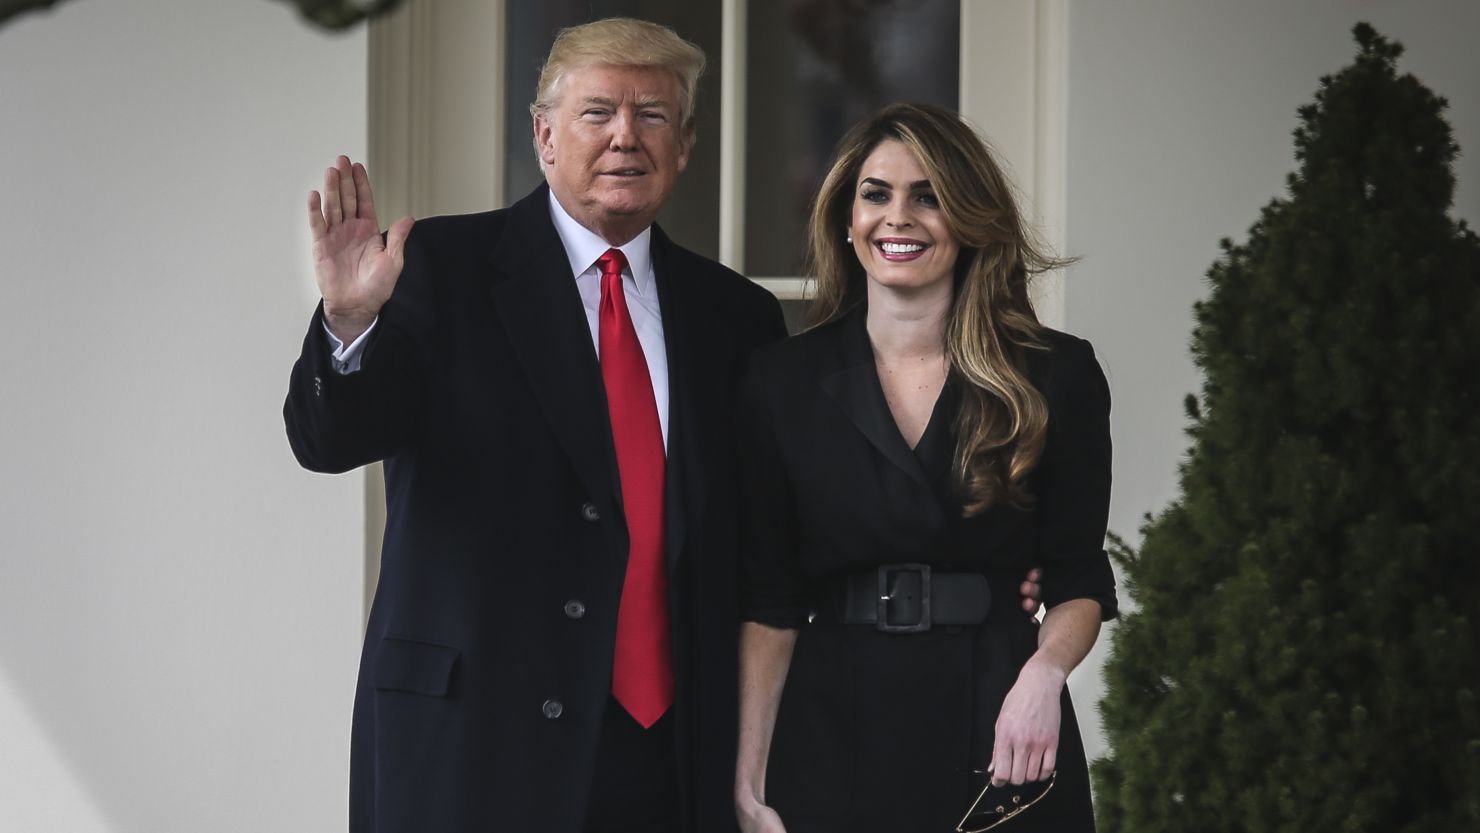 Then-President Donald Trump stands next to Hope Hicks before boarding Marine One on the South Lawn of the White House on March 29, 2018, in Washington.